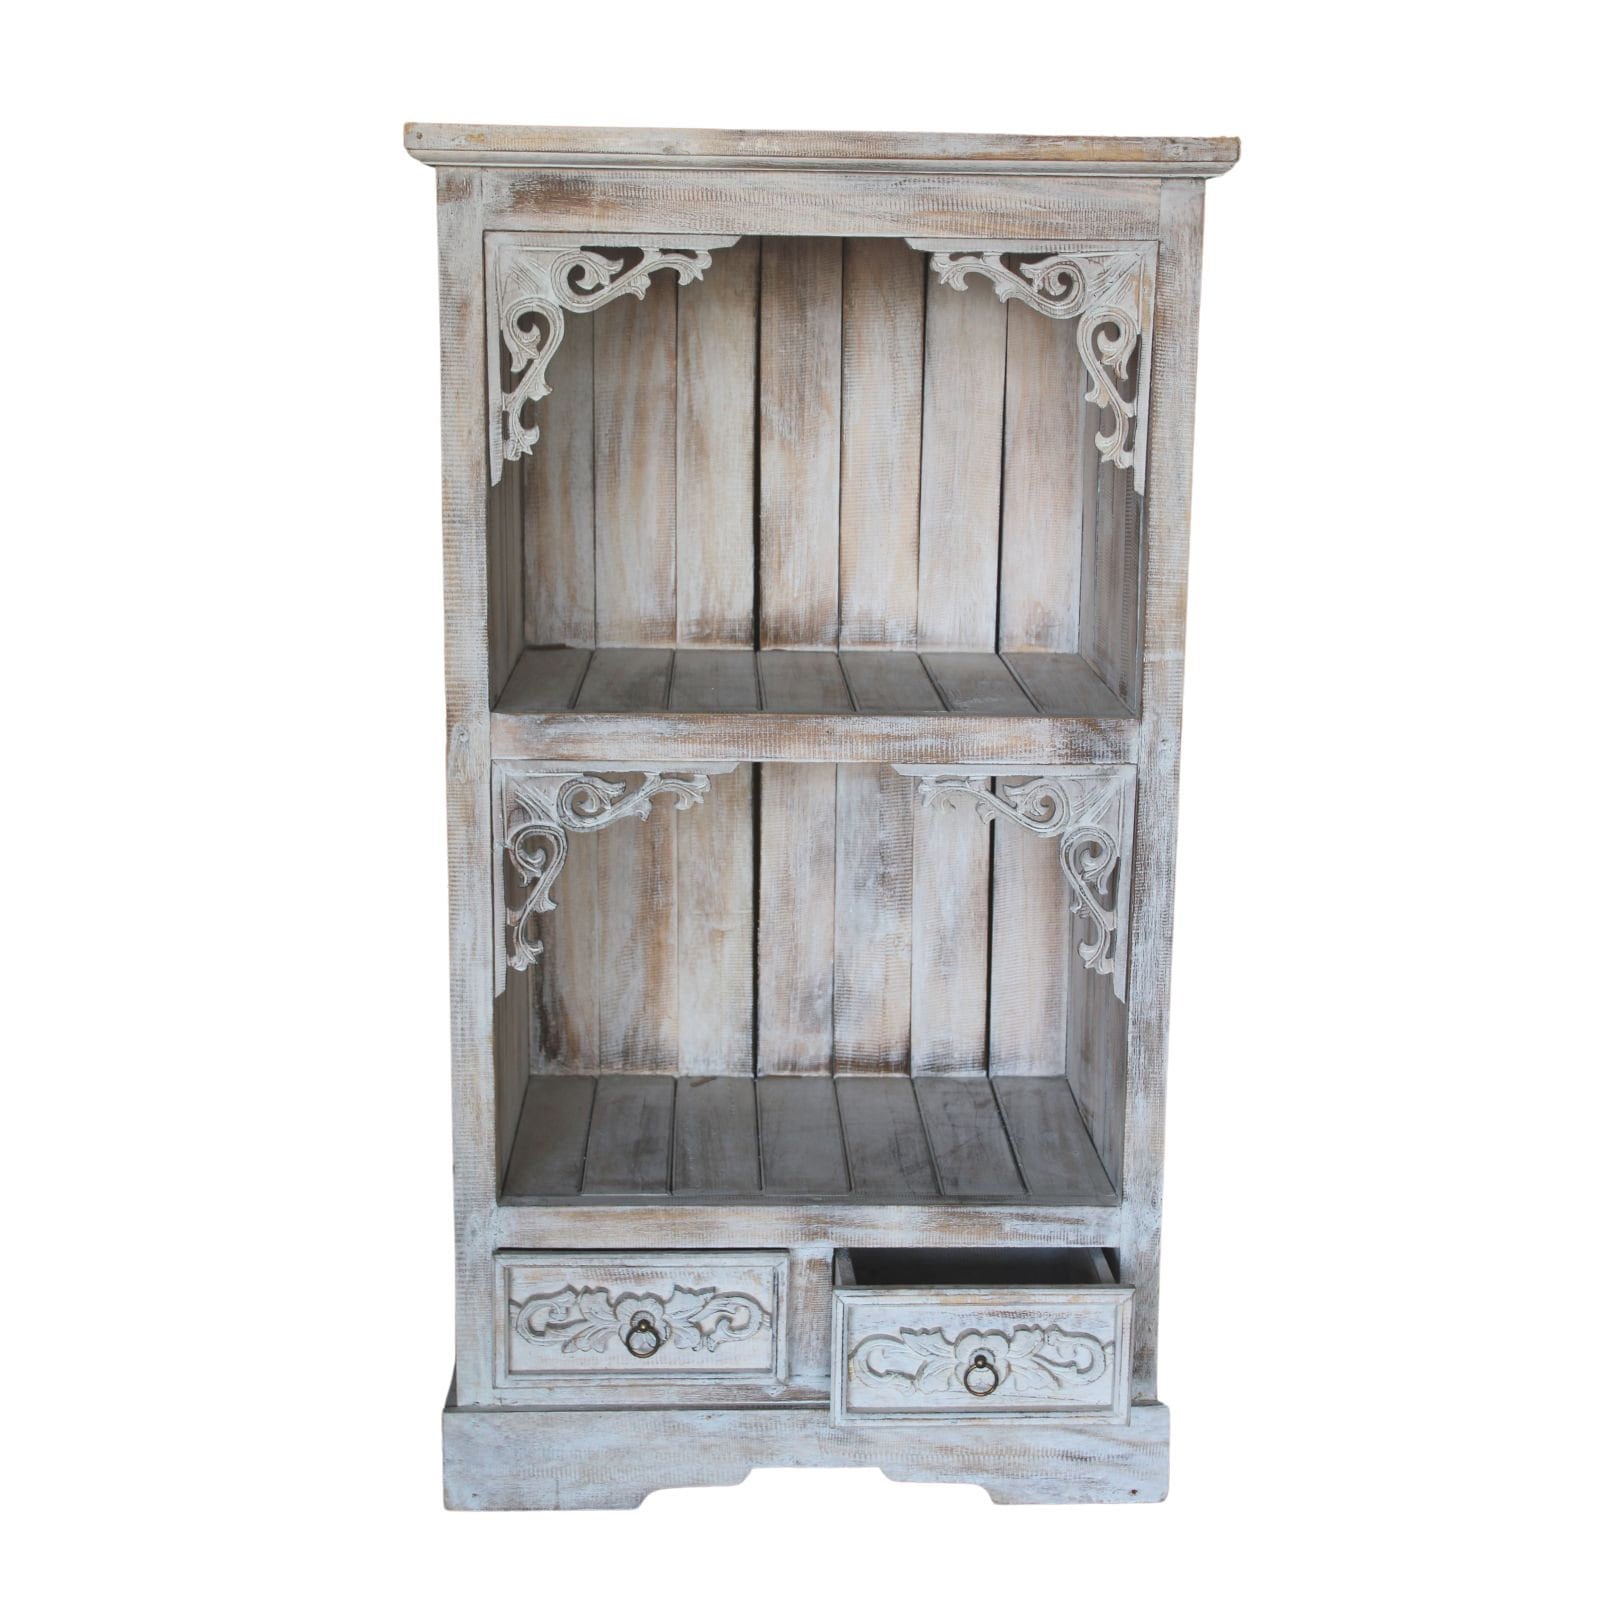 Albasia Bathroom Cabinets-whitewashed hand carved, exquisite detailing-oerfect for any room-Dimensions: H - 120cm; W - 66.7cm; D - 40cm. Wonkey Donkey Bazaar